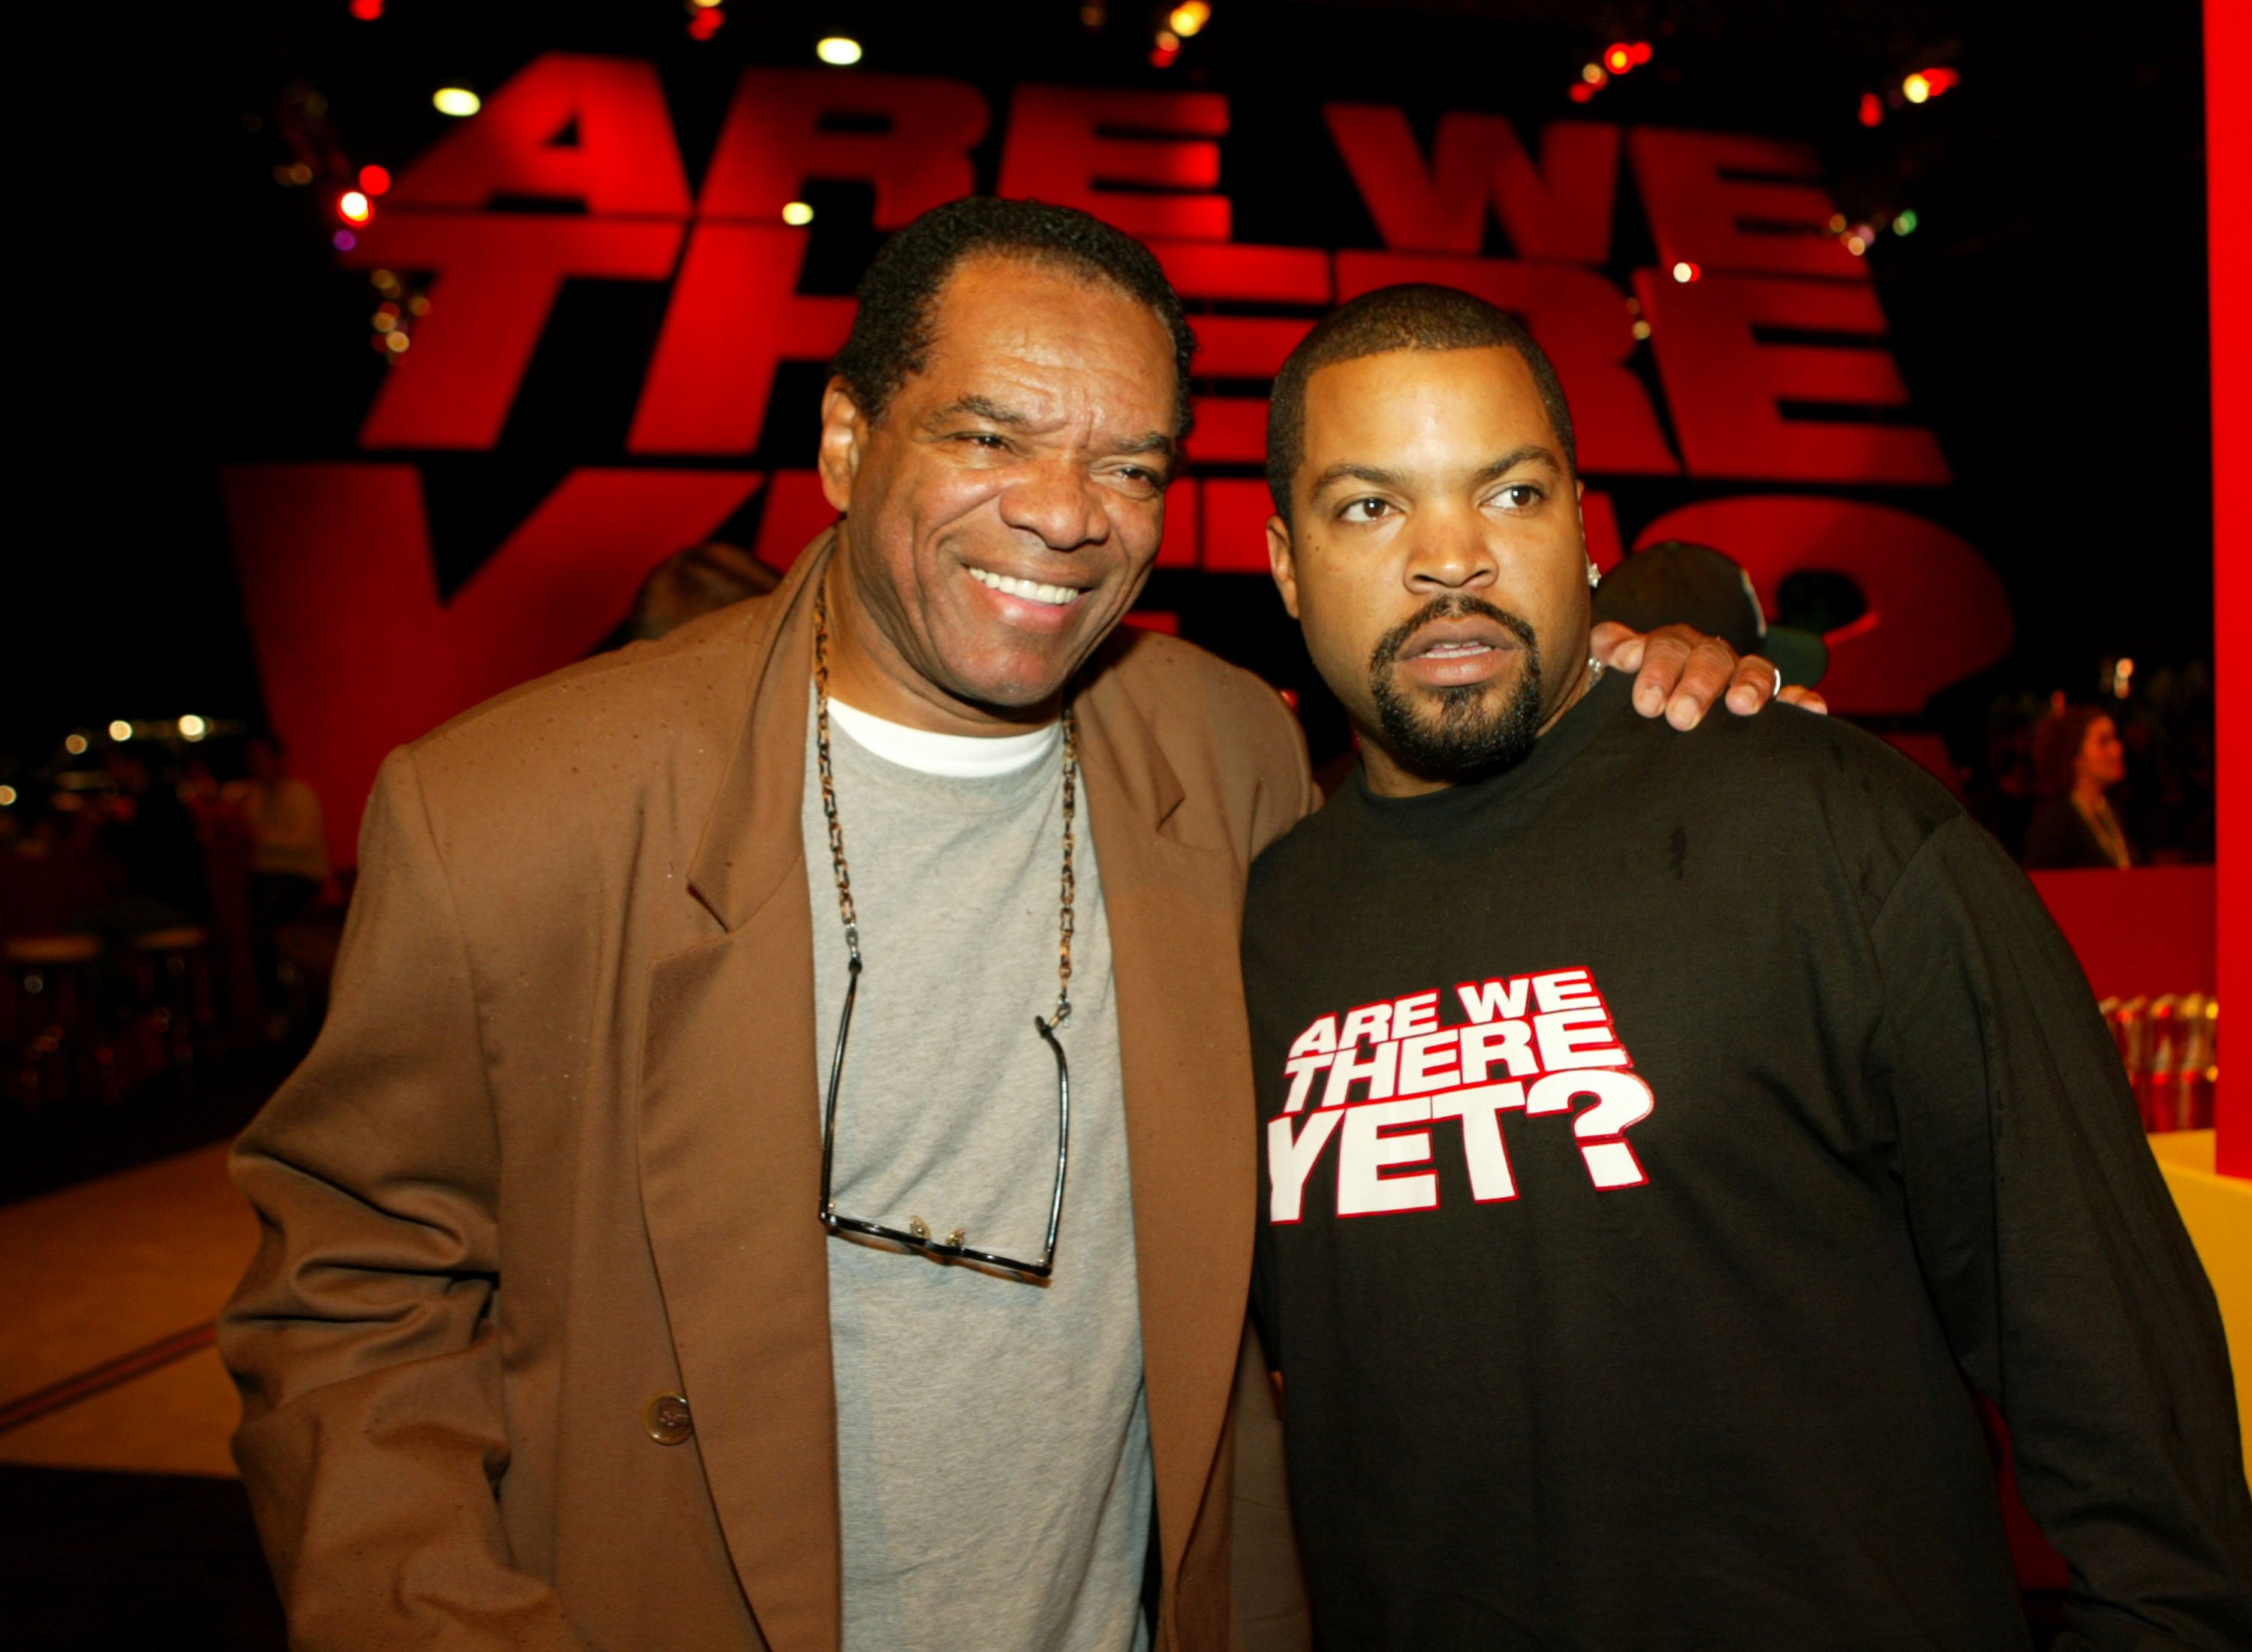 John Witherspoon & Ice Cube pose at the after party of the premiere of "Are We There Yet" on Jan. 9, 2005 in California | Photo: Getty Images